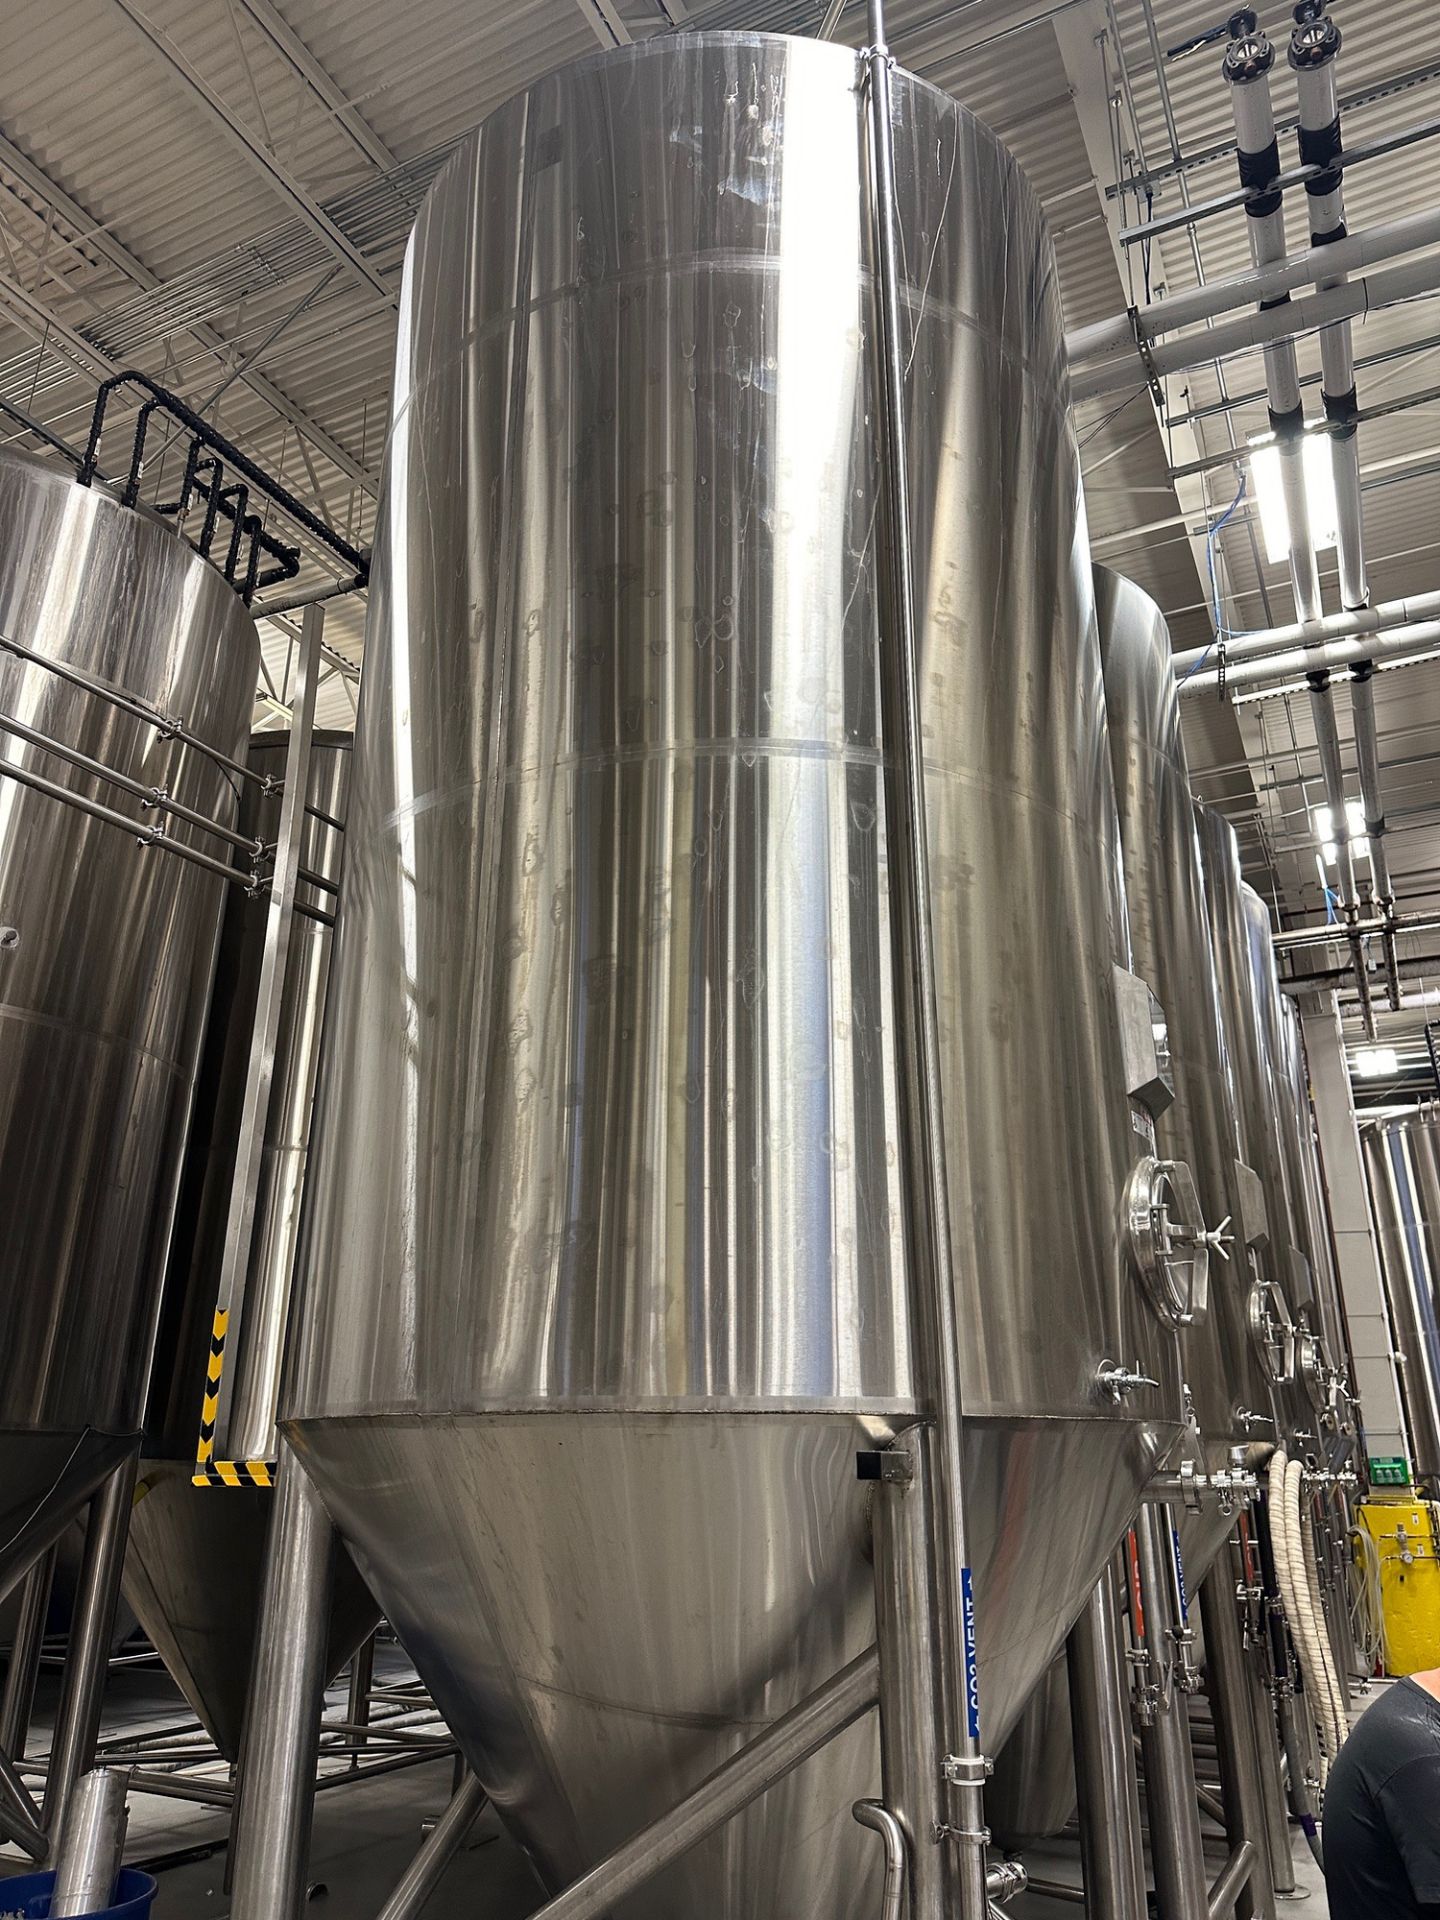 (1 of 8) 2020 Marks 132 BBL FV / 175 BBL or 5,400 Gal Max Capacity Jacketed Stainless Steel Ferm - Image 3 of 5